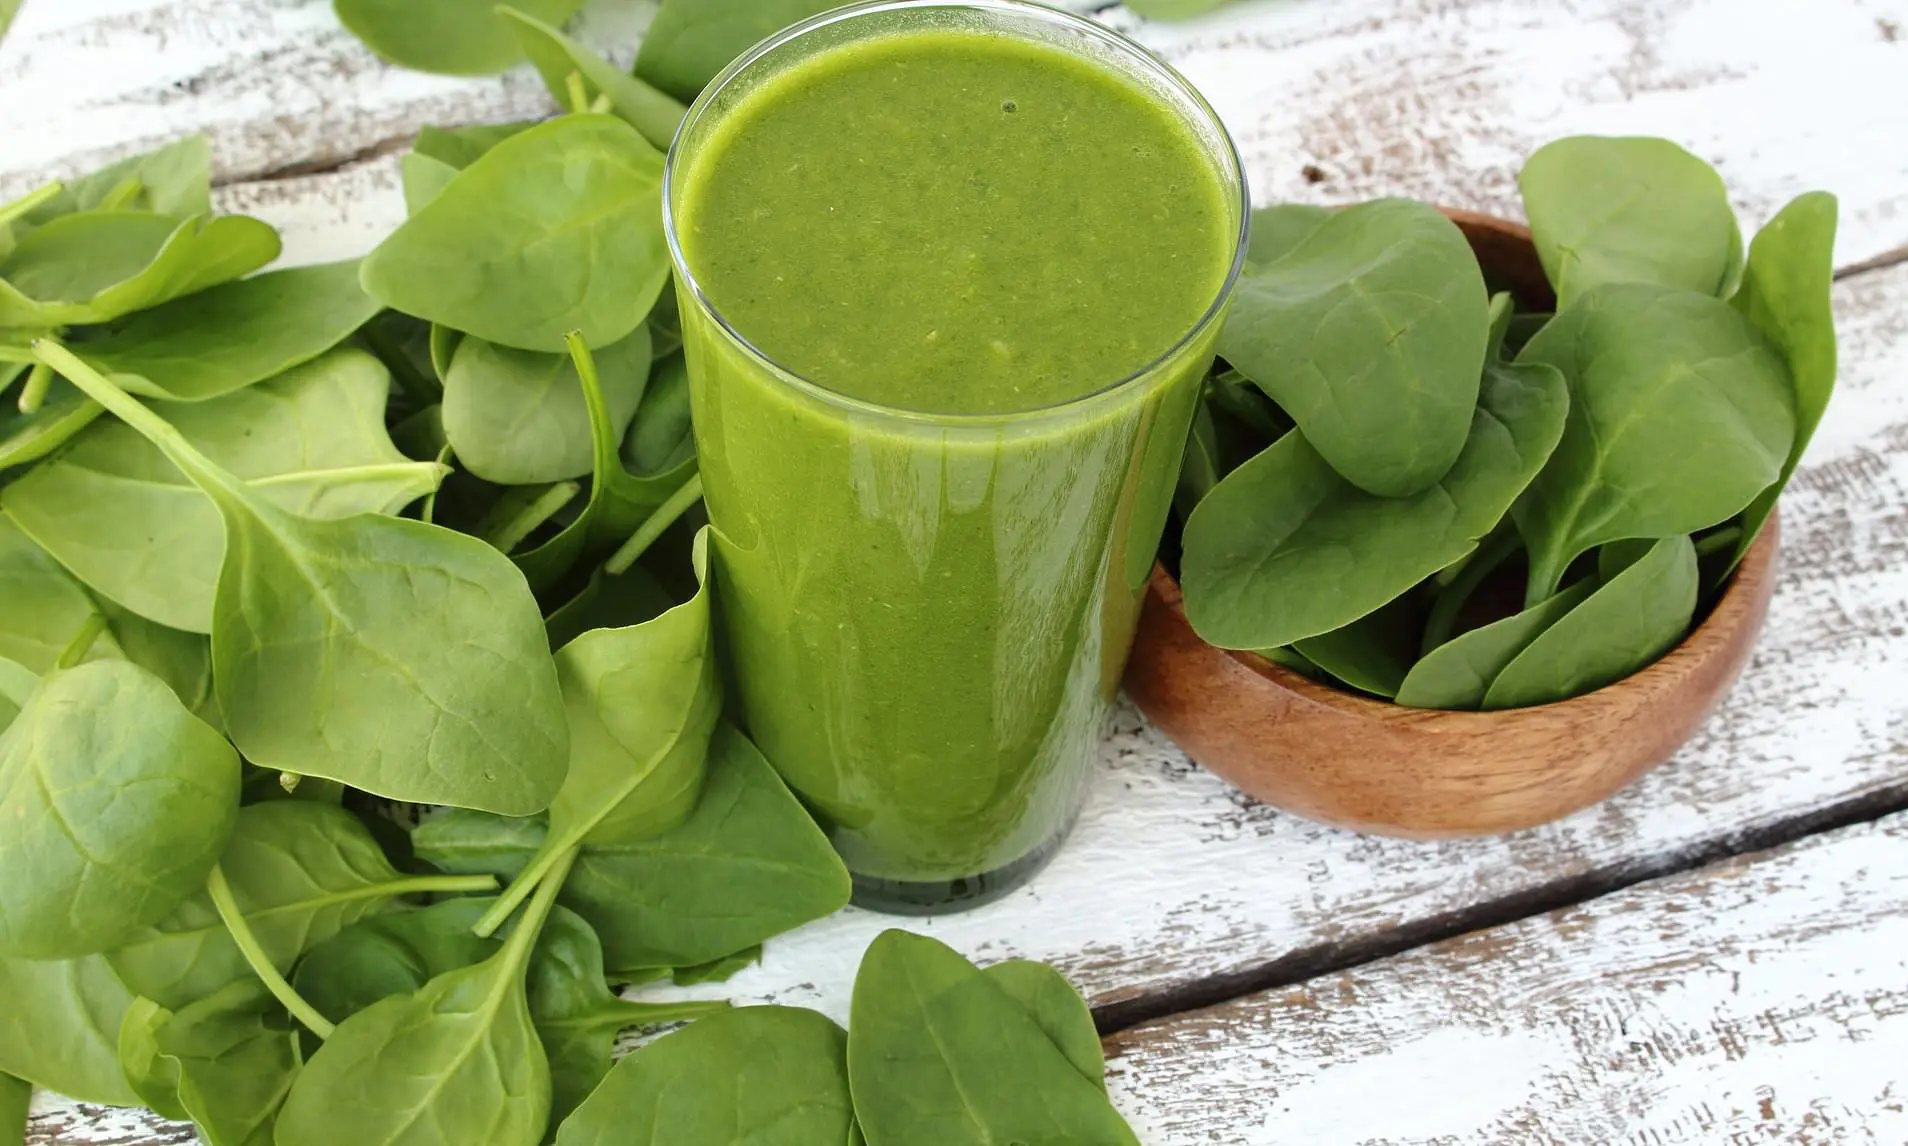 Putting raw spinach in a smoothie is the healthiest way to eat it | Daily Mail Online